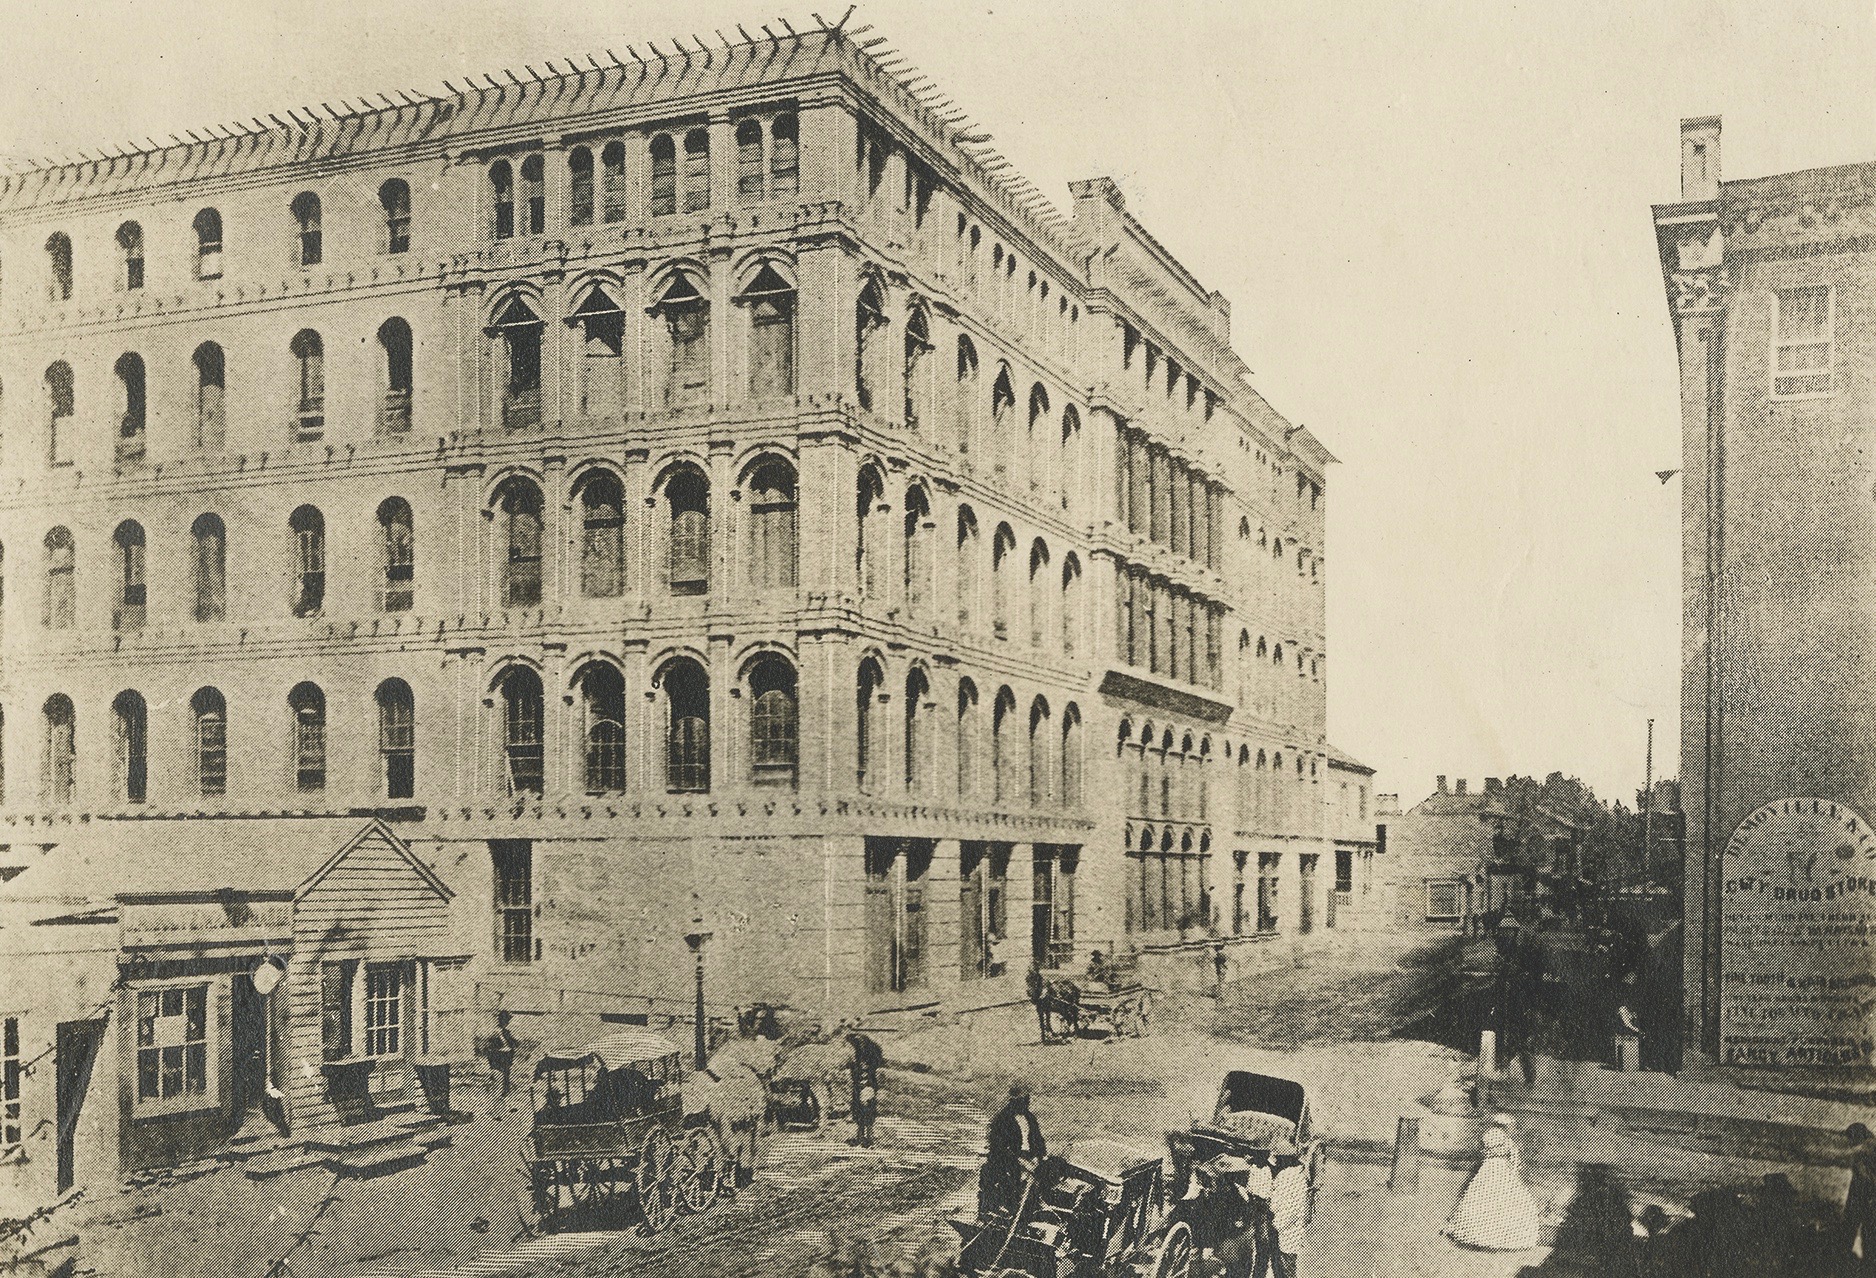 Although the Maxwell House Hotel looks complete in this image taken at the end of the war, it was really just a shell with a temporary interior. That interior collapsed on September 29, 1863, killing and injuring dozens of Confederate prisoners held there. (Courtesy of Tennessee State Library and Archives)